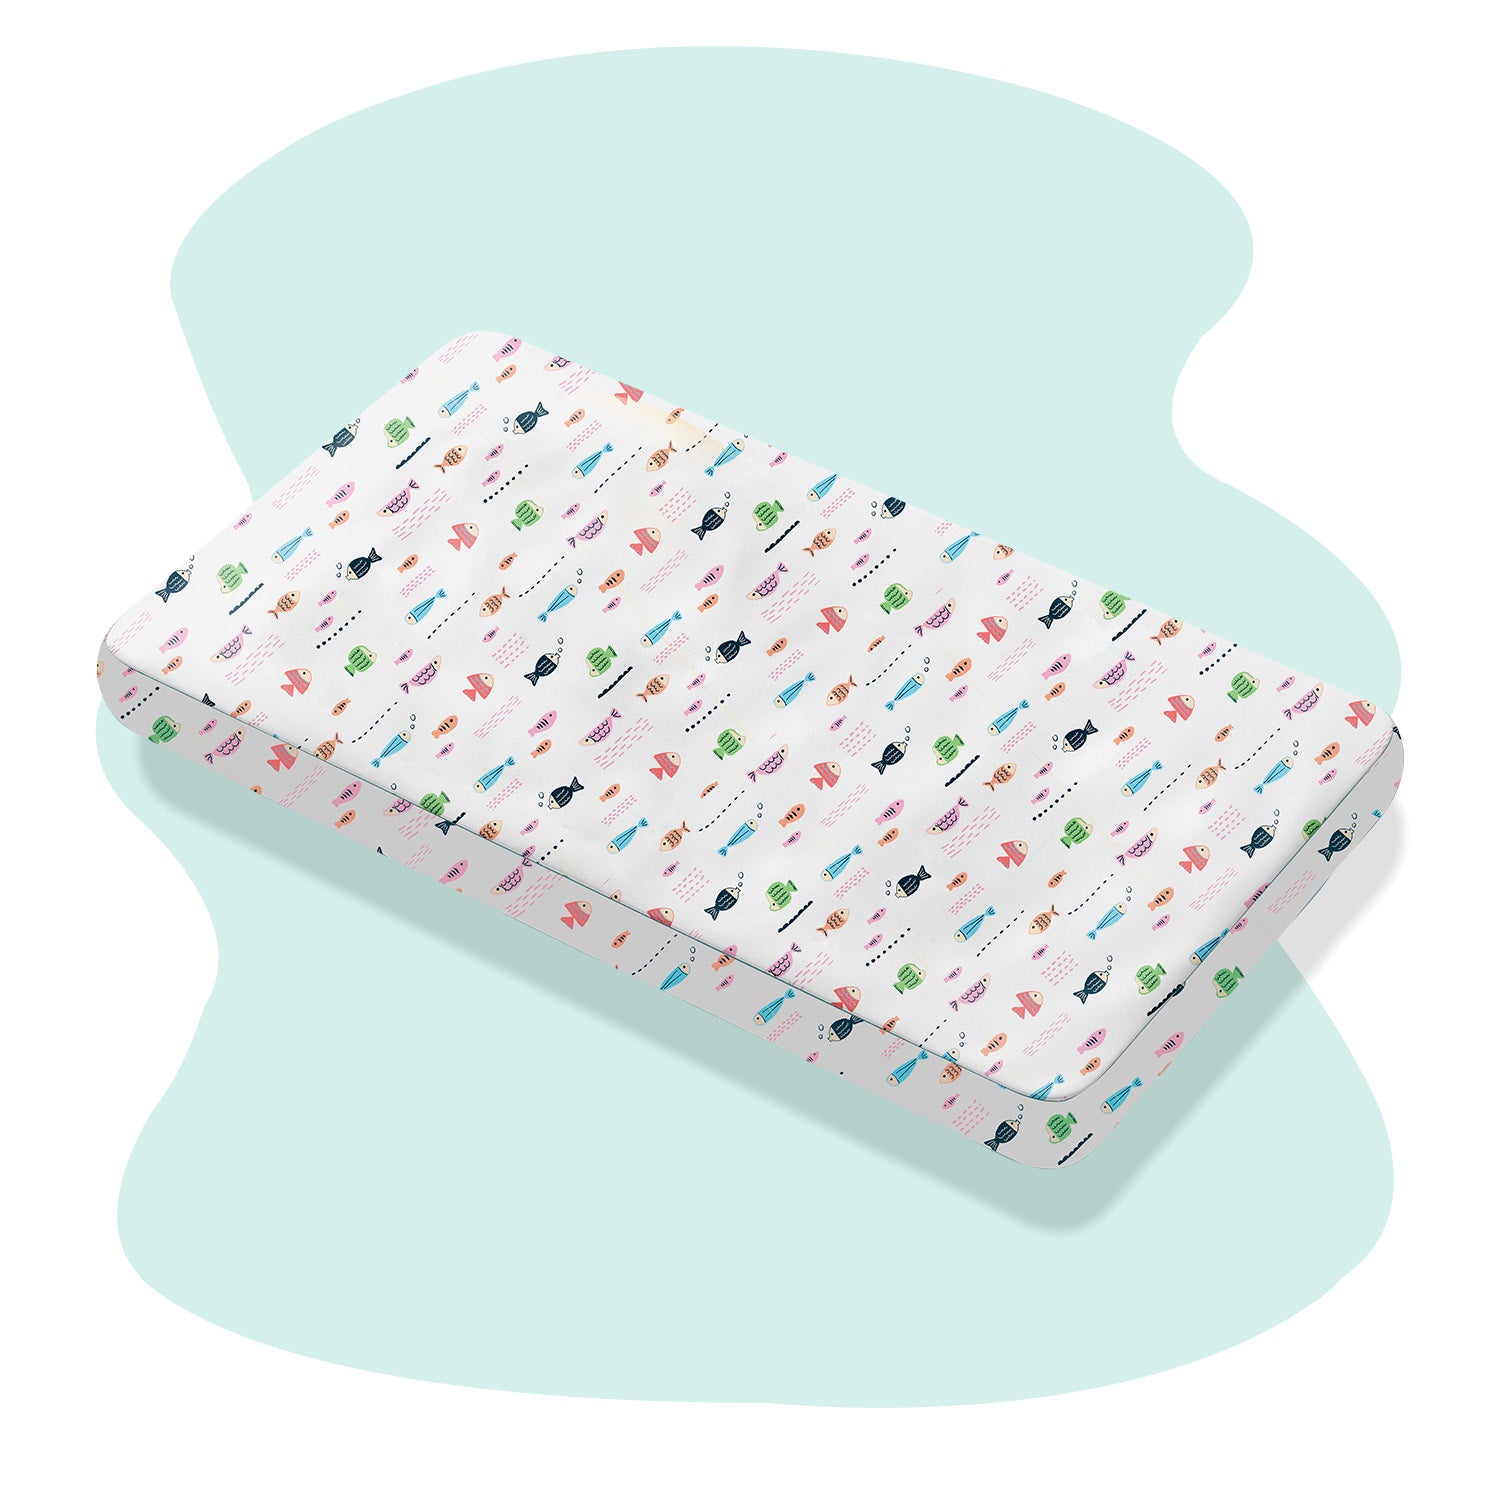 Cotton Crib Set-Complete Baby Bedding Bundle:Blanket, Pillow, Cot Bumper, Bolster, Fitted Sheet ( MERMAID)